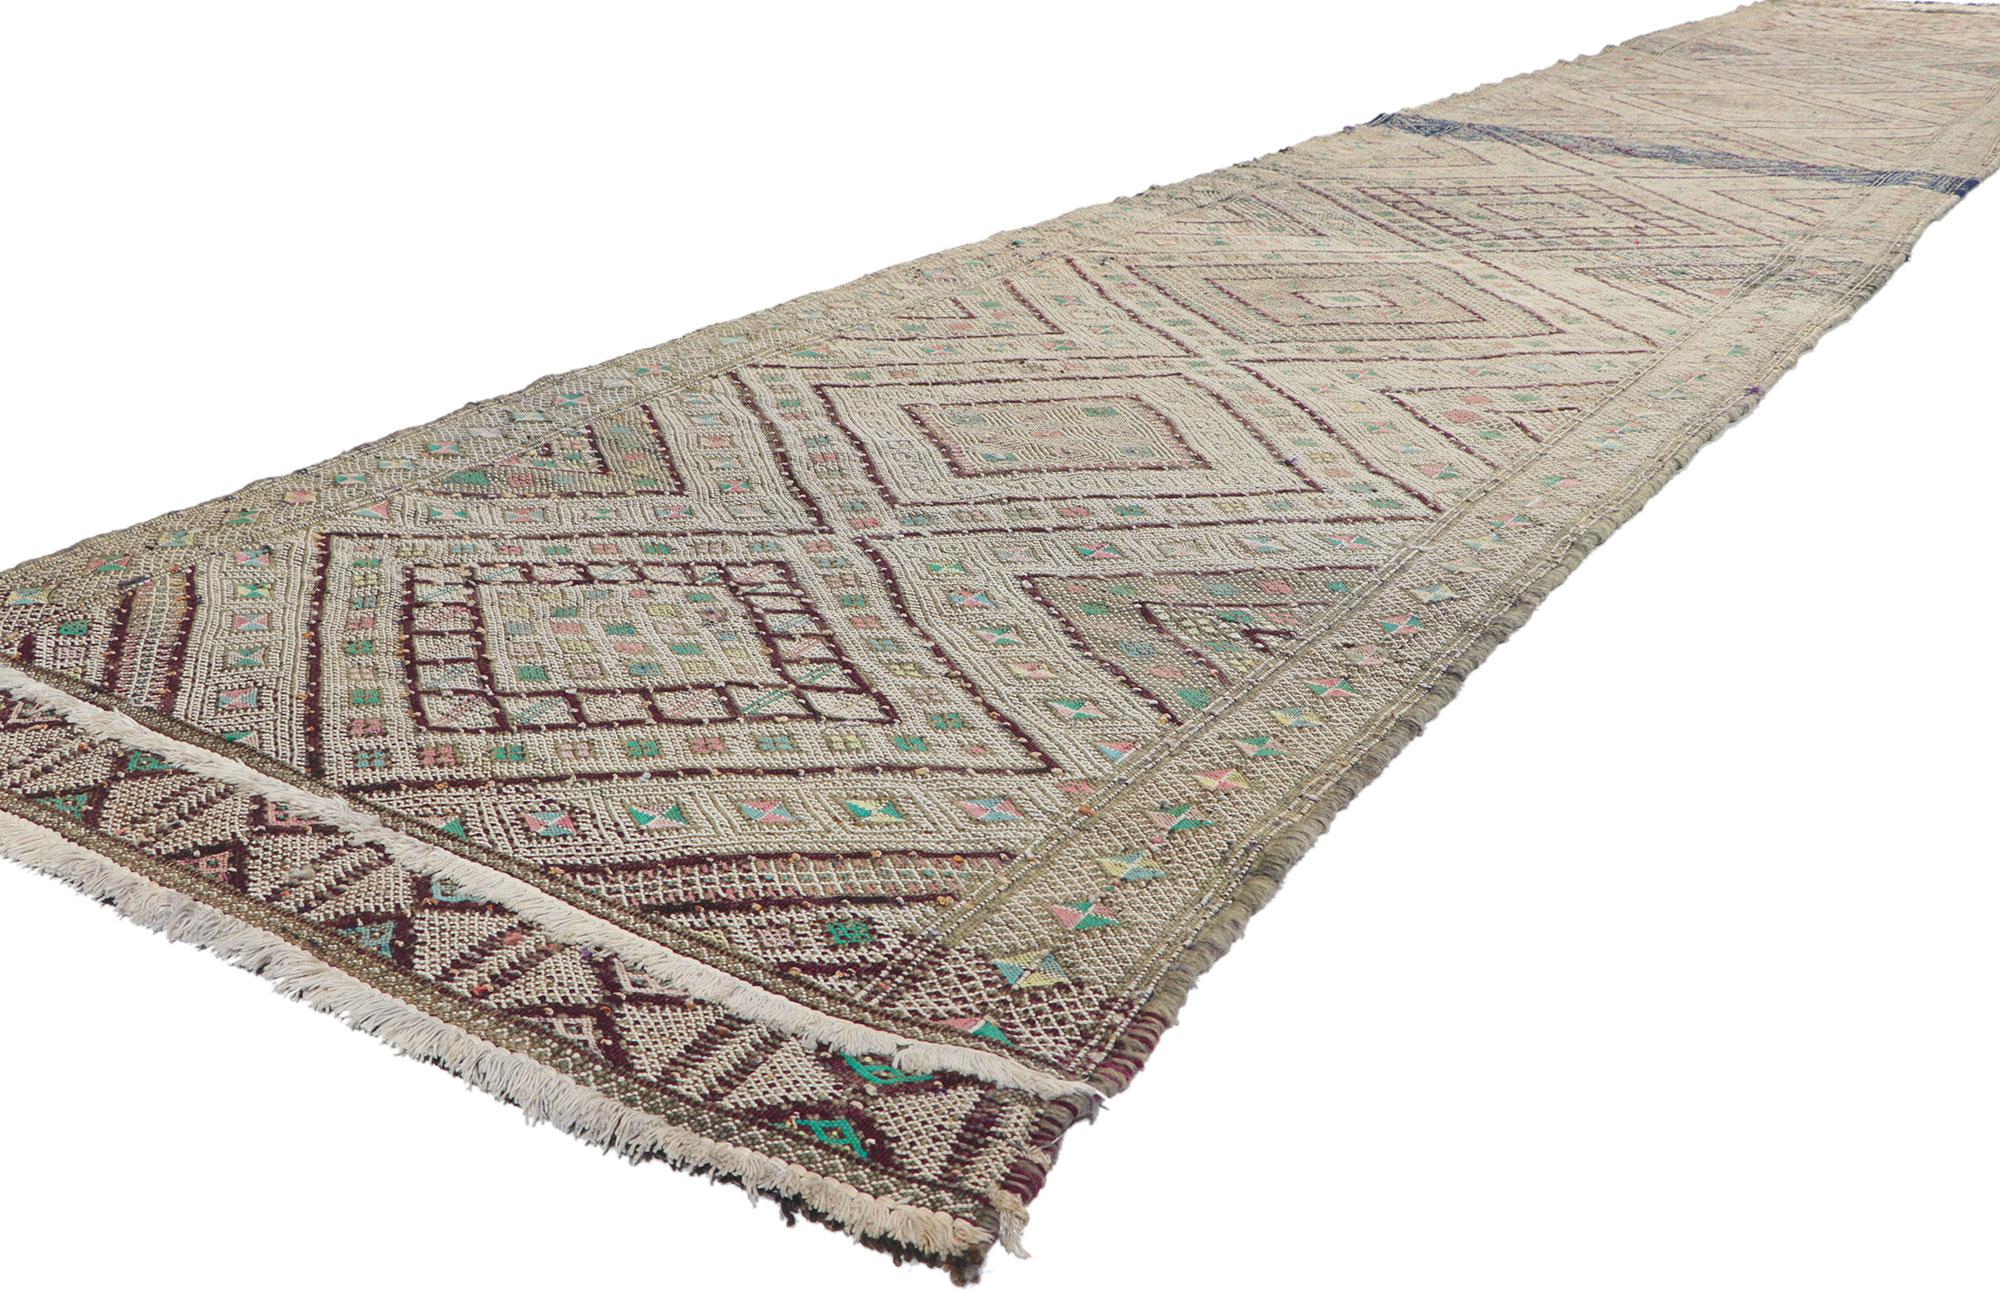 21717 Vintage Zemmour Moroccan Kilim runner, 03'04 x 18'04. Full of tiny details and tribal style, this hand-woven wool vintage Zemmour Berber Moroccan kilim rug runner is a captivating vision of woven beauty. The abrashed field is composed of